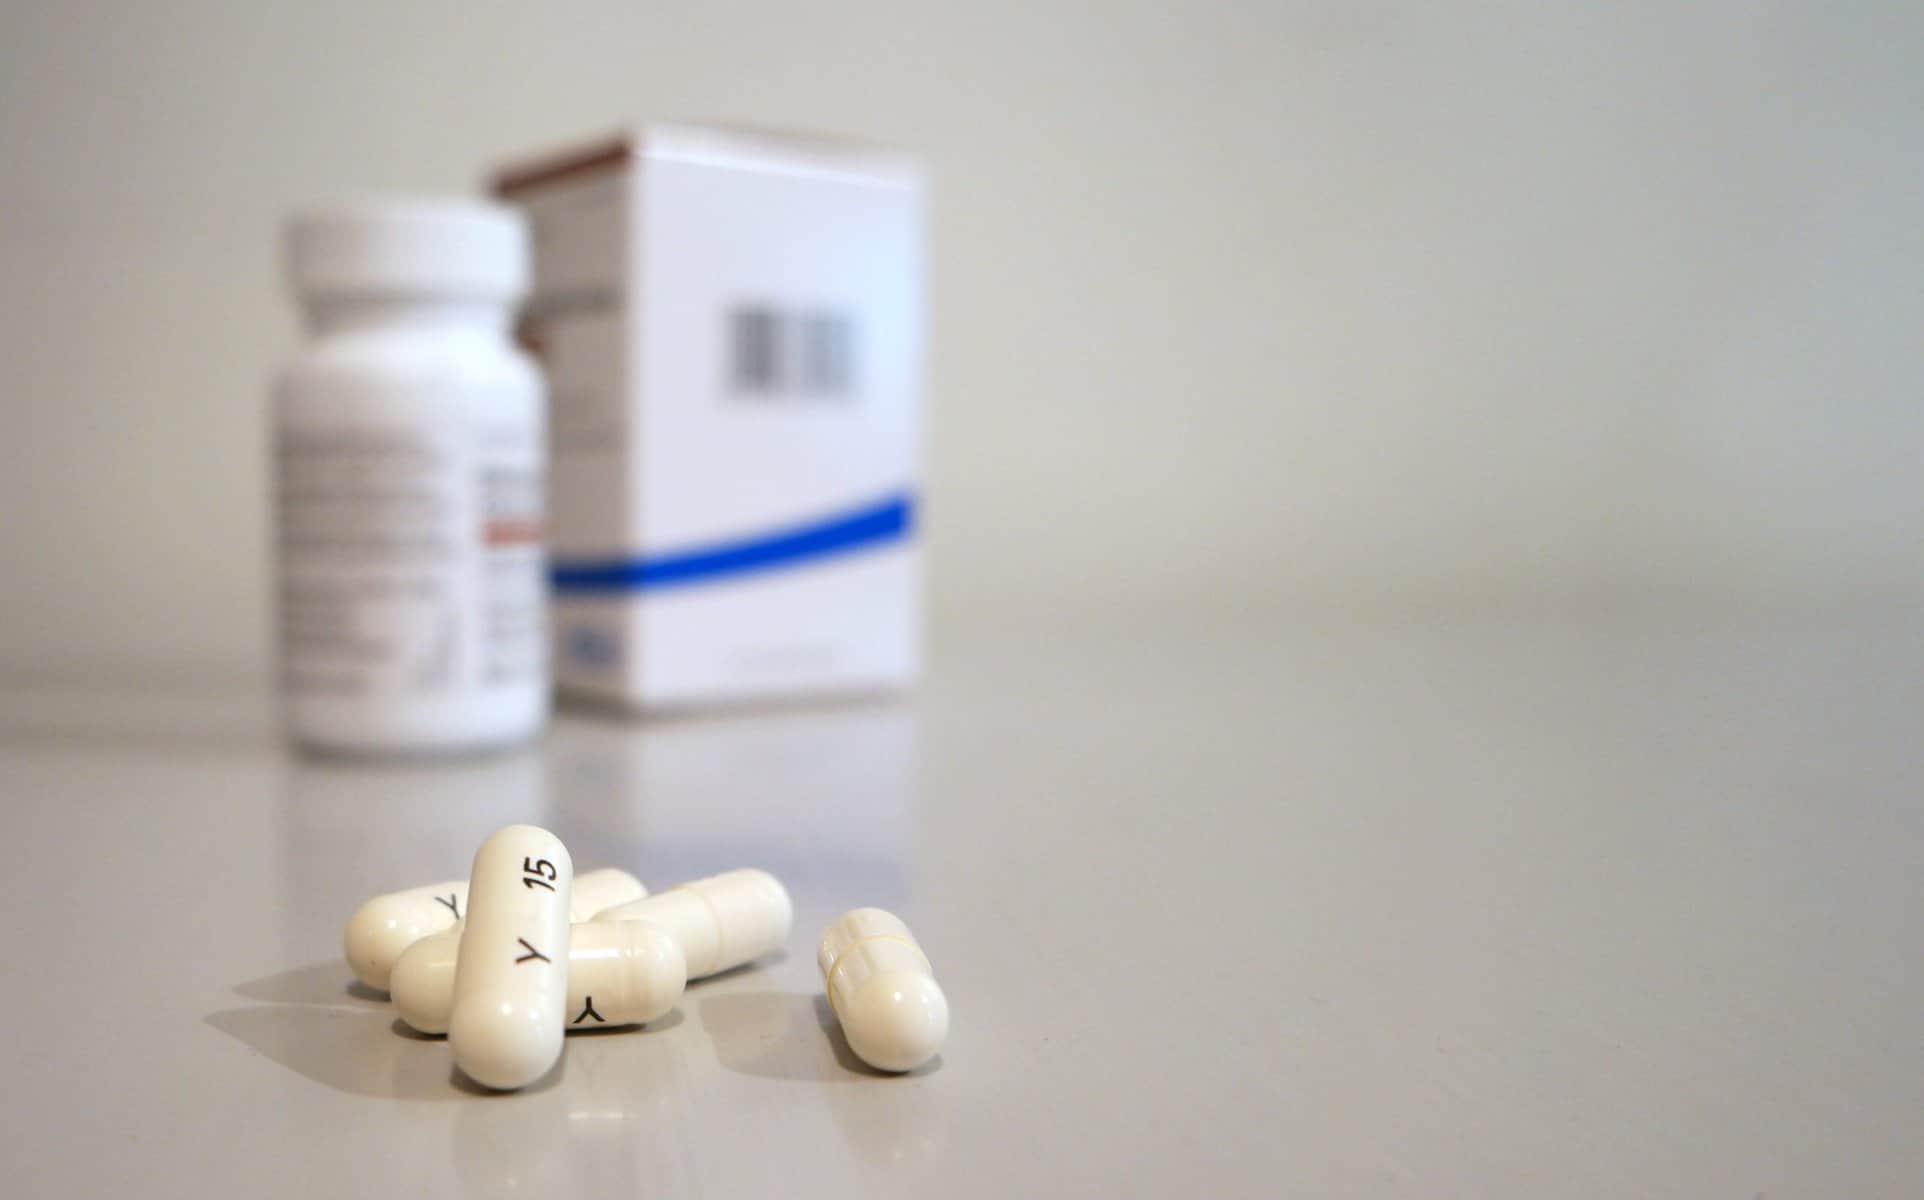 Prescription medicine capsules are shown with the Rx bottle and box in the background.